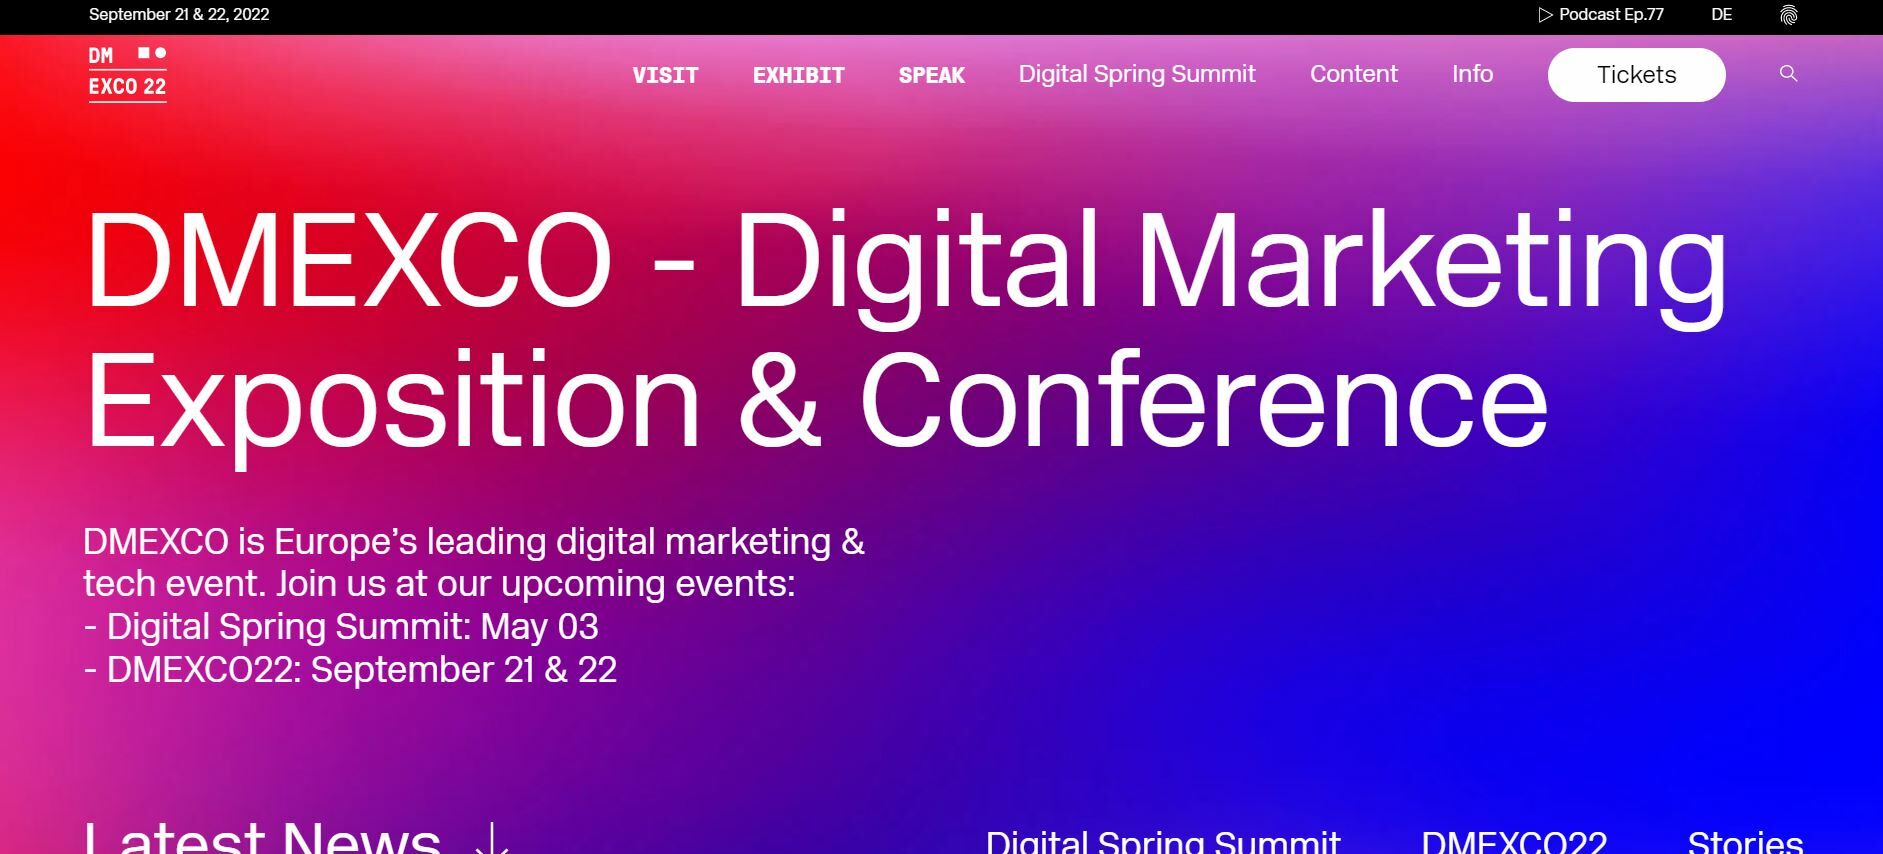 DMEXCO: Digital Marketing Exposition and Conference.